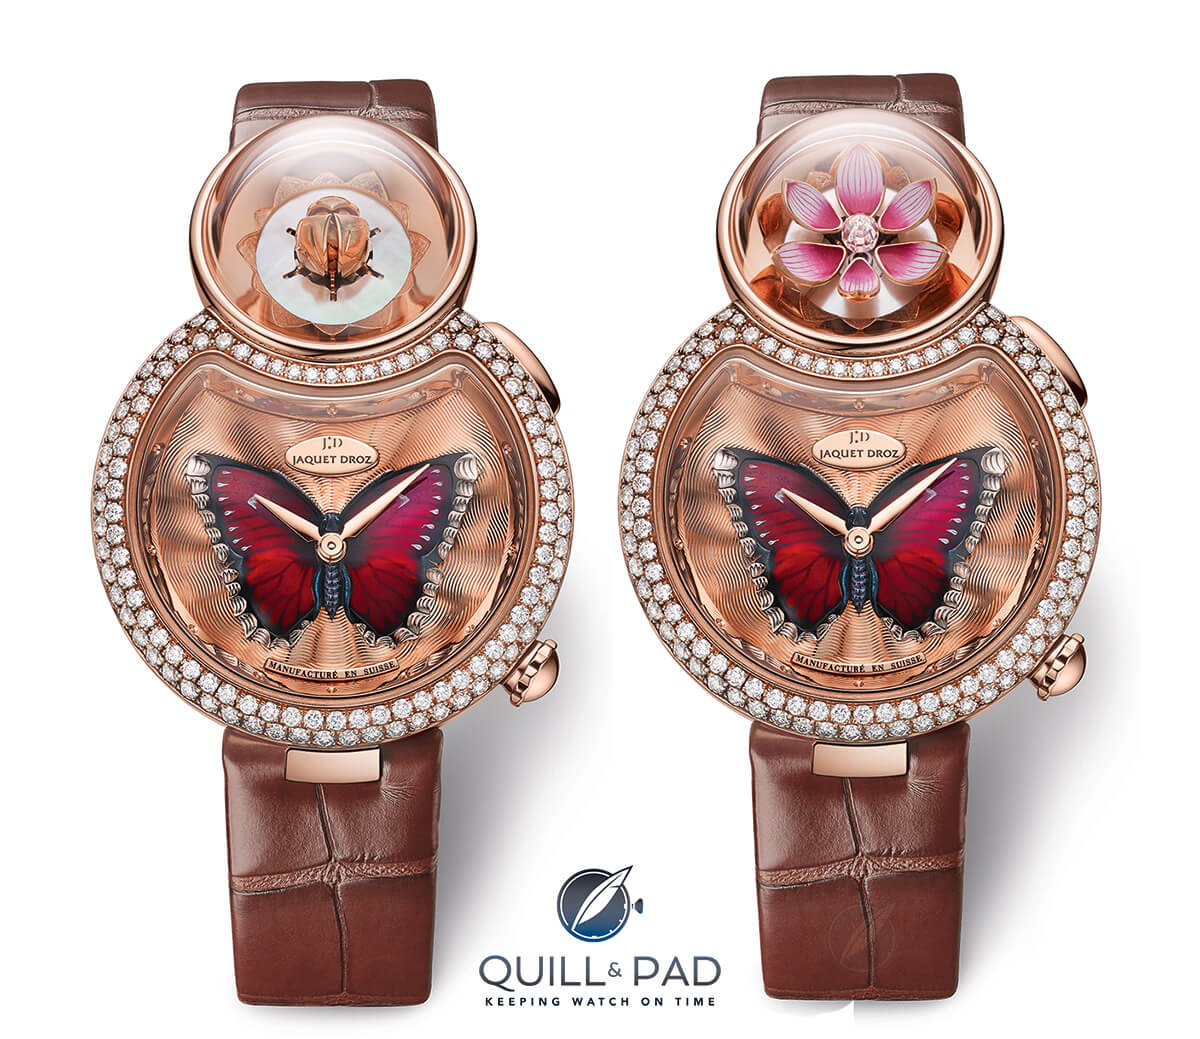 Jaquet Droz Lady 8 Flower with lotus flower closed (left) and open